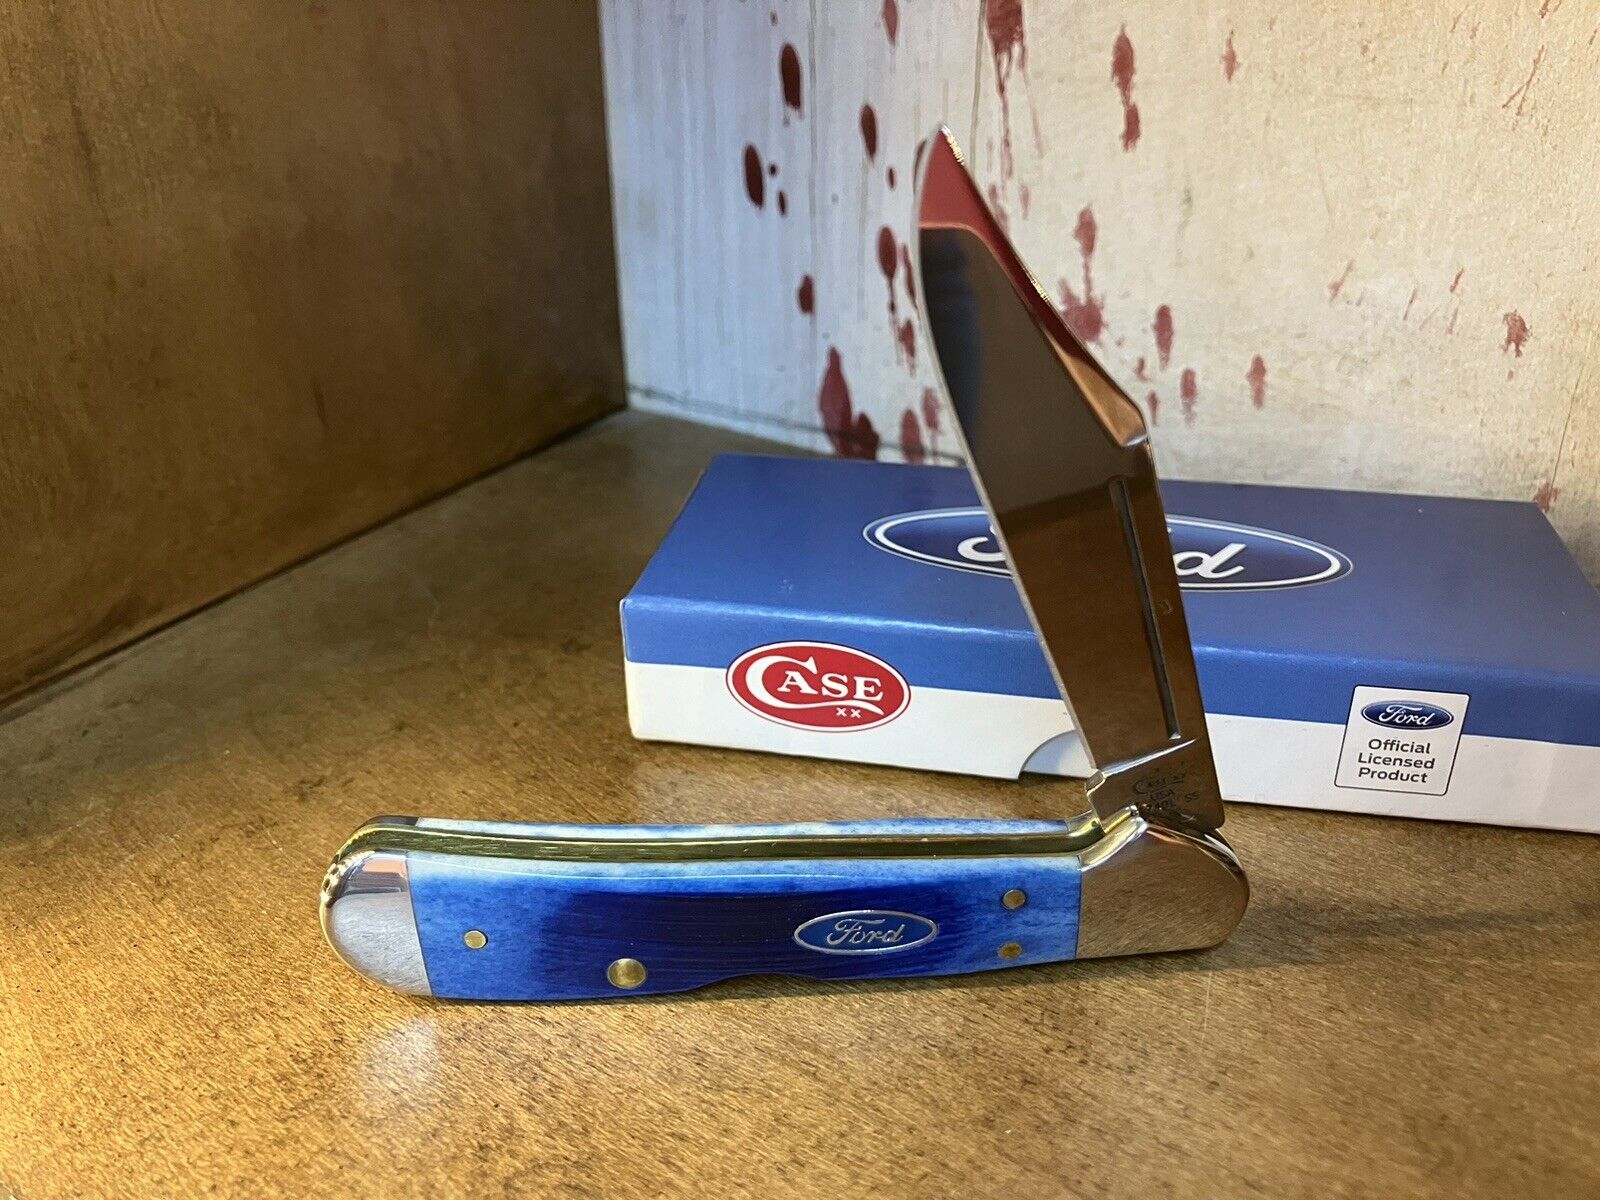 CASE BLUE FORD MINI COPPERLOCK KNIFE # 61749L SS NEVER USED IN BOX